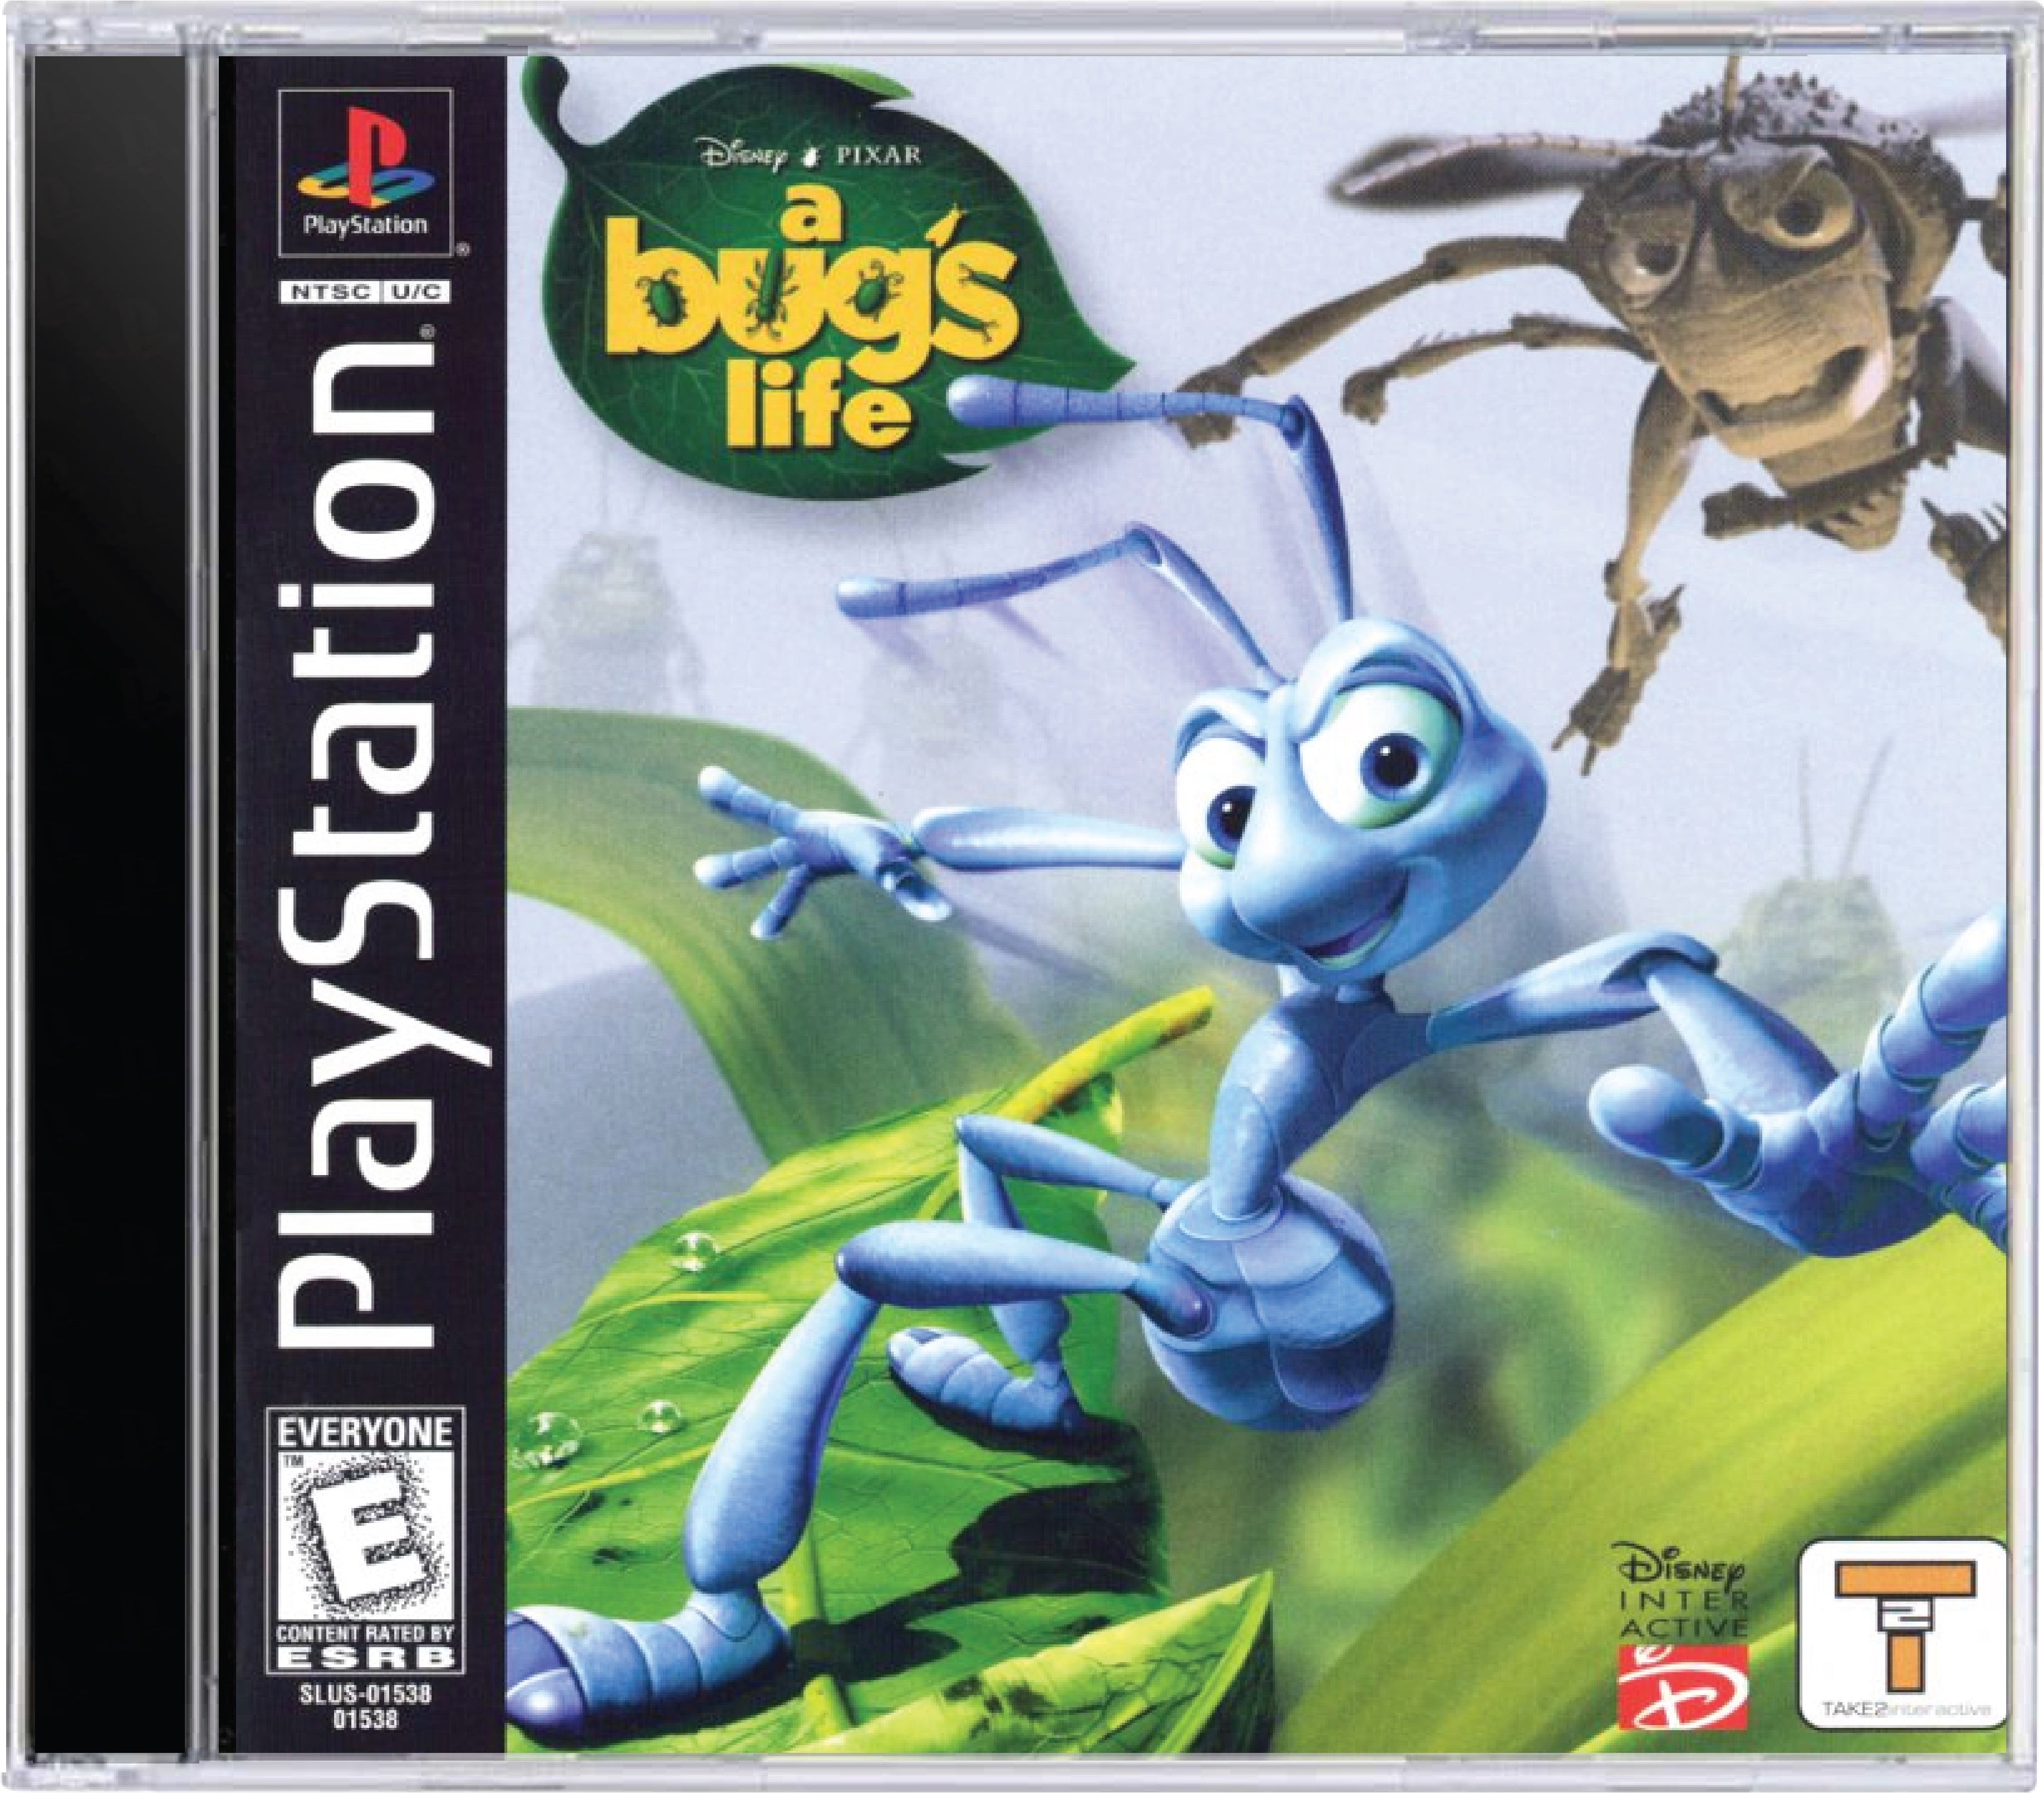 A Bug's Life Cover Art and Product Photo